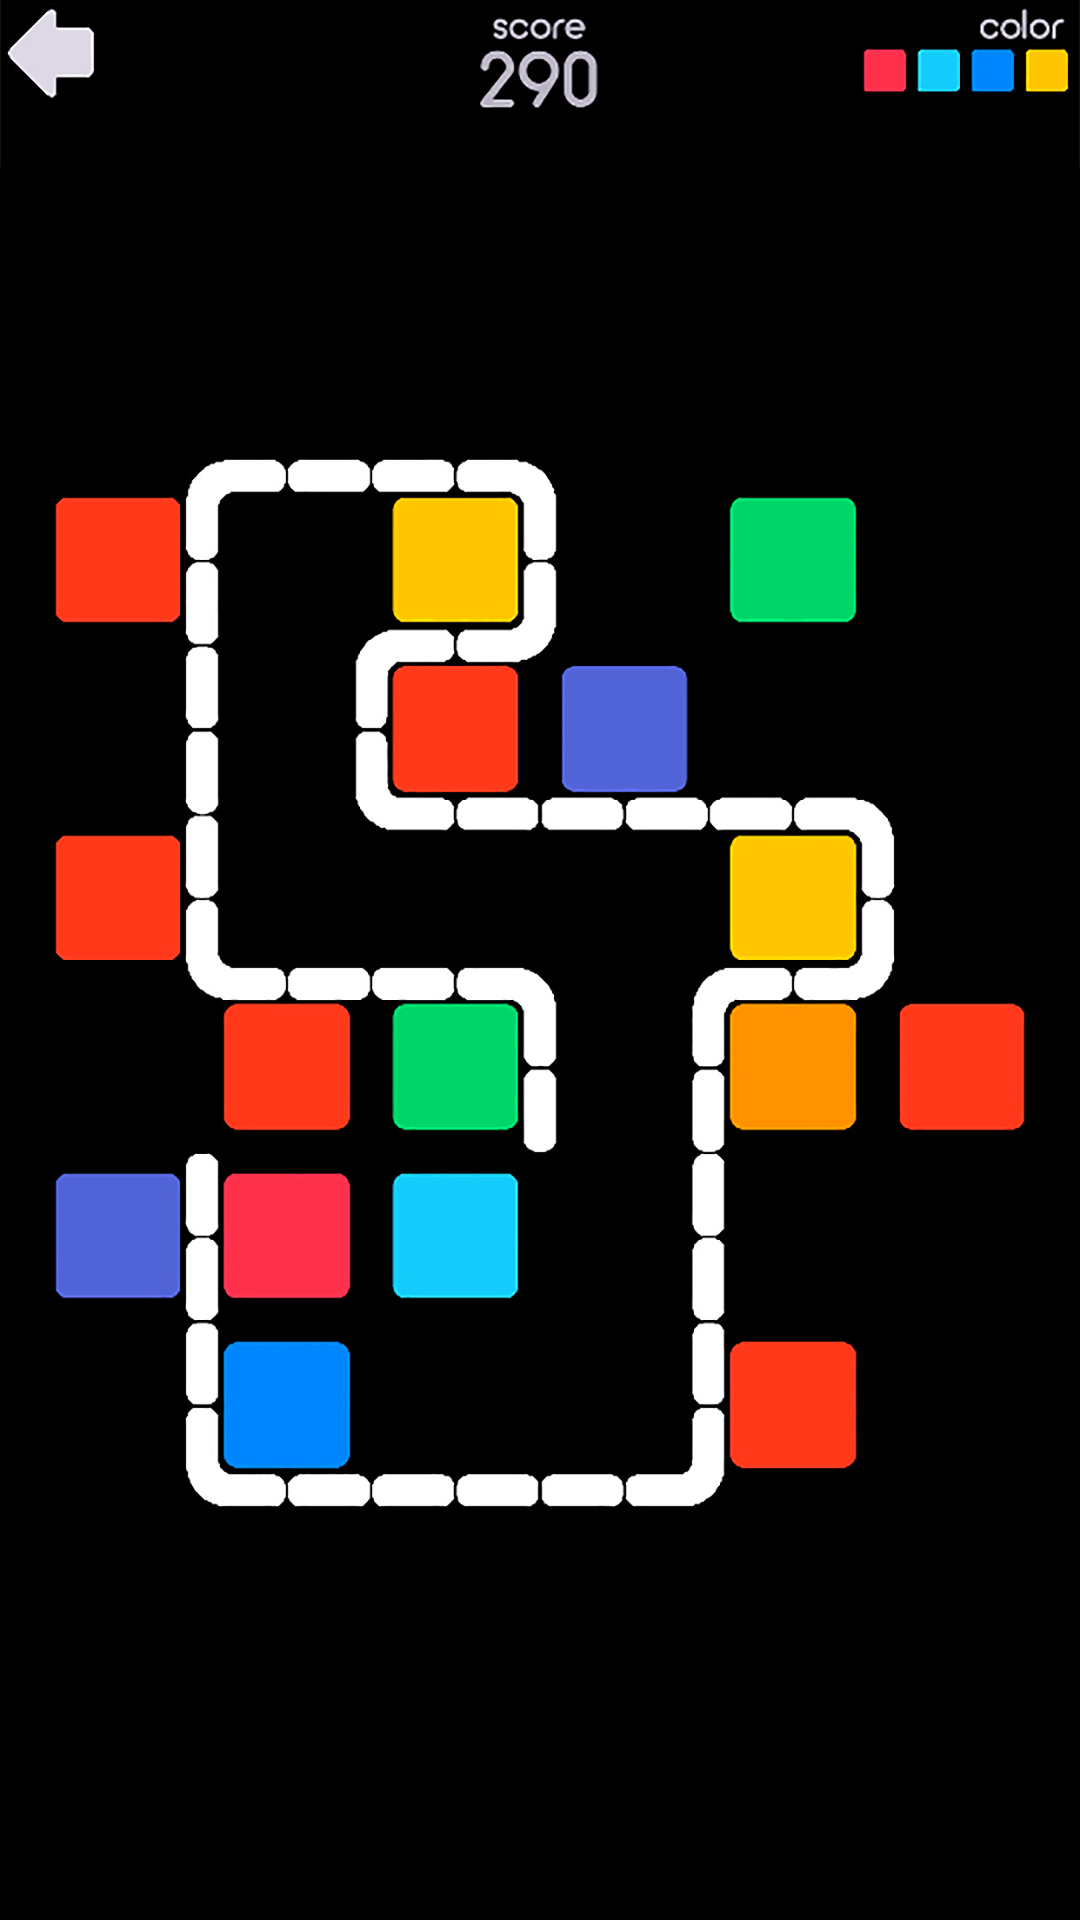 Screenshot of Color Fence - A Puzzle Game